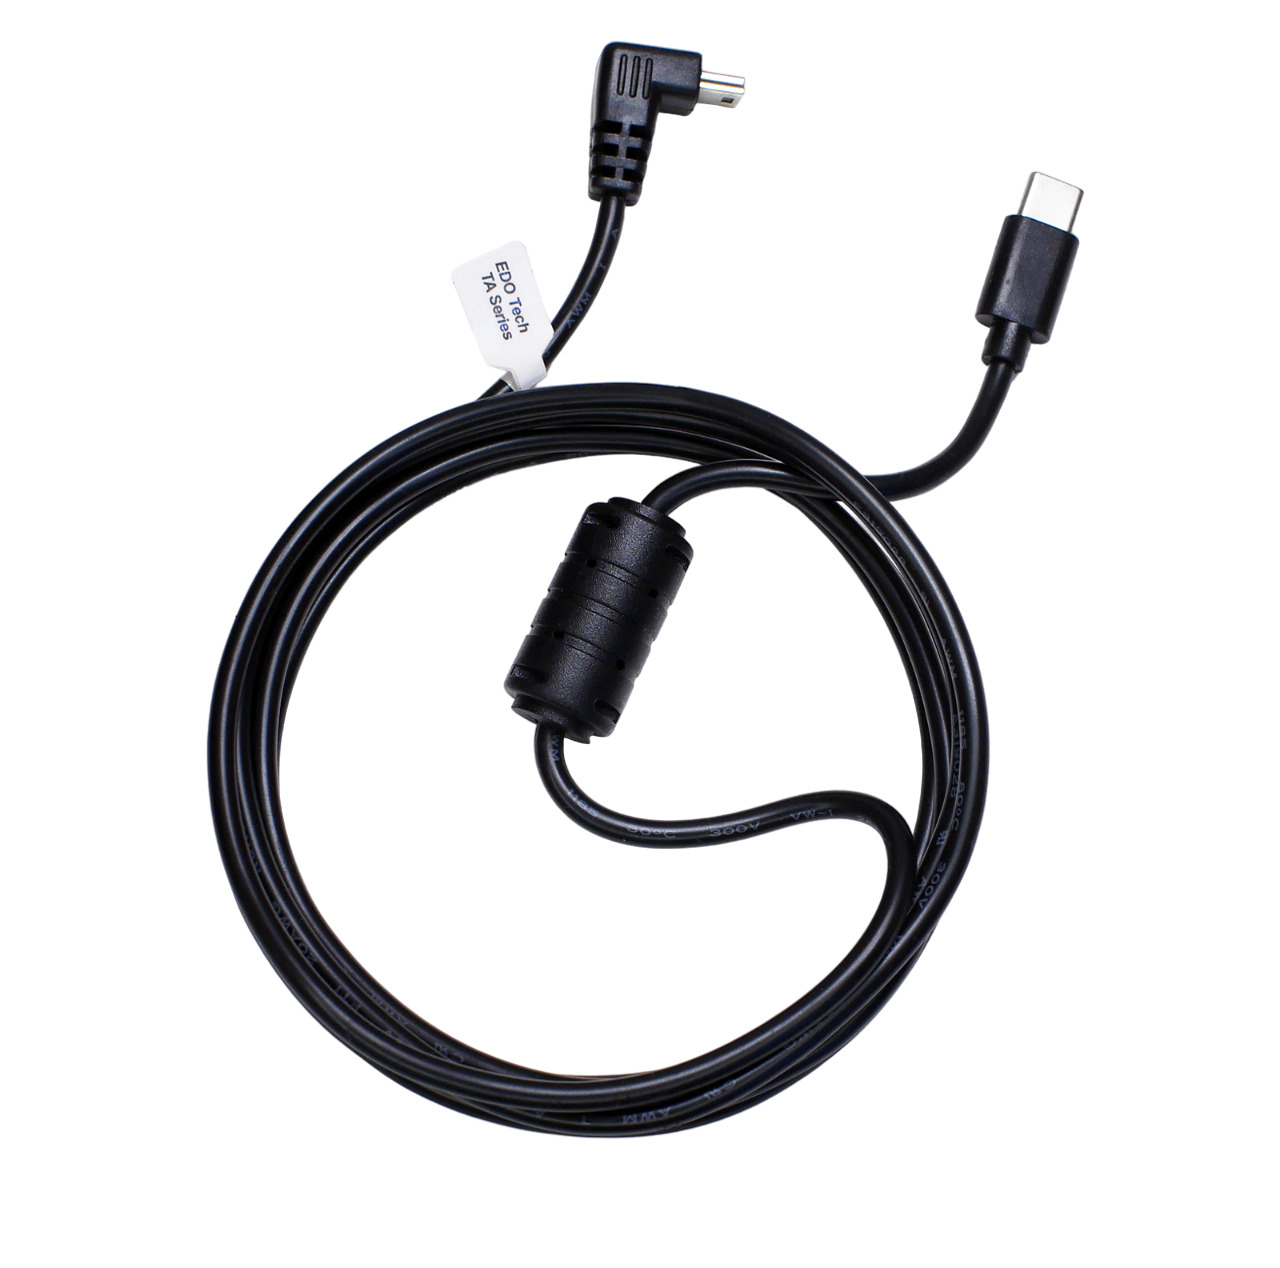 Charger Power Cord for Garmin Nuvi Drive DriveSmart DriveAssist on Type-C Port